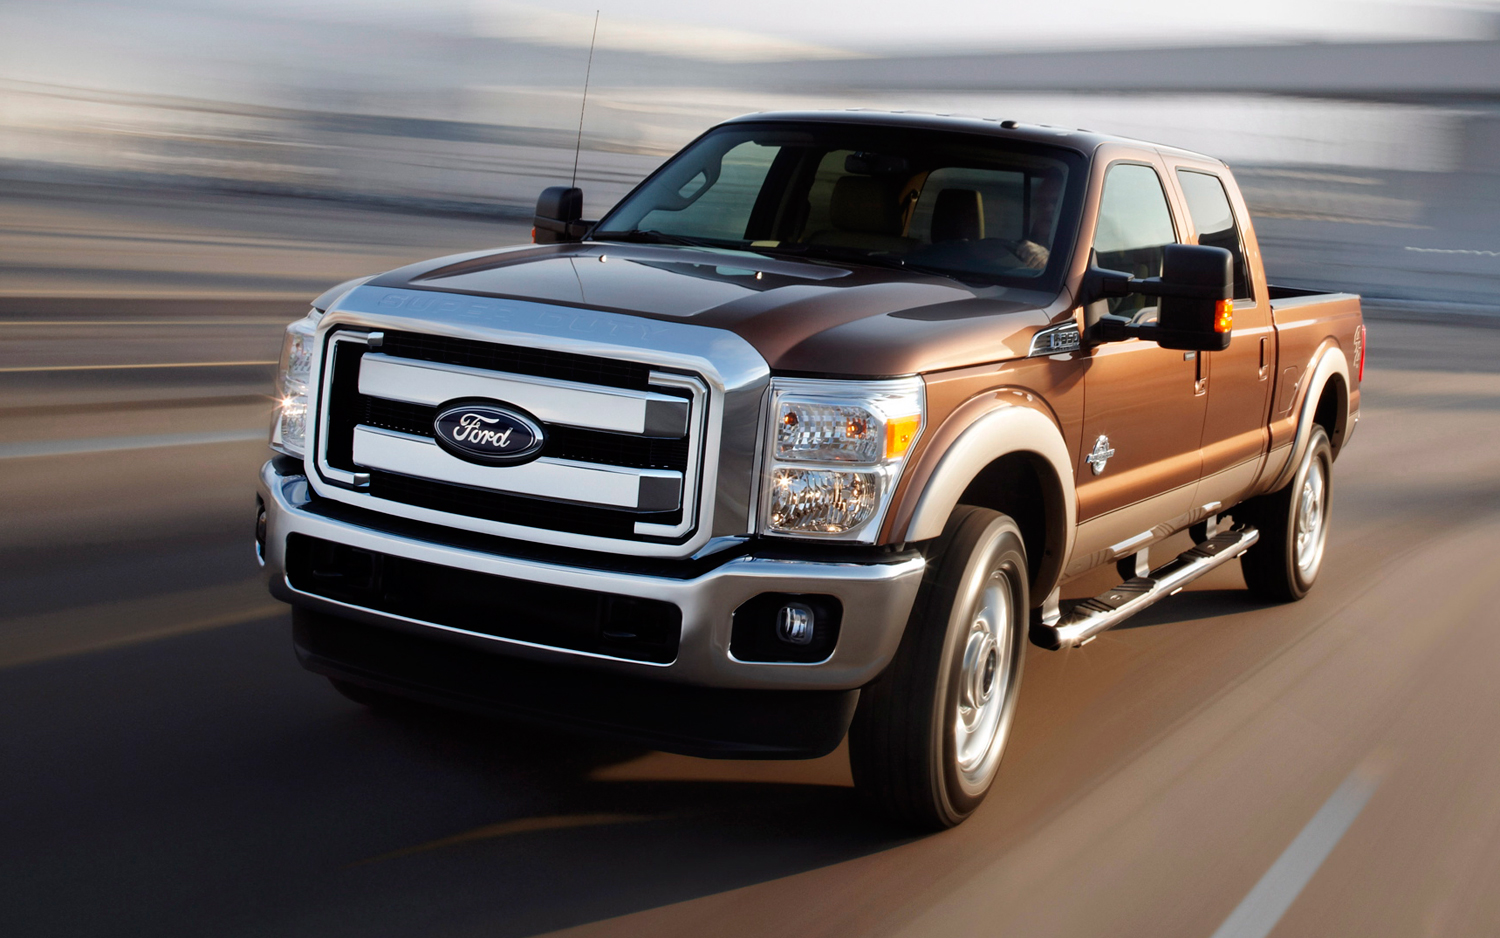 2010 Ford f250 king ranch specs #8